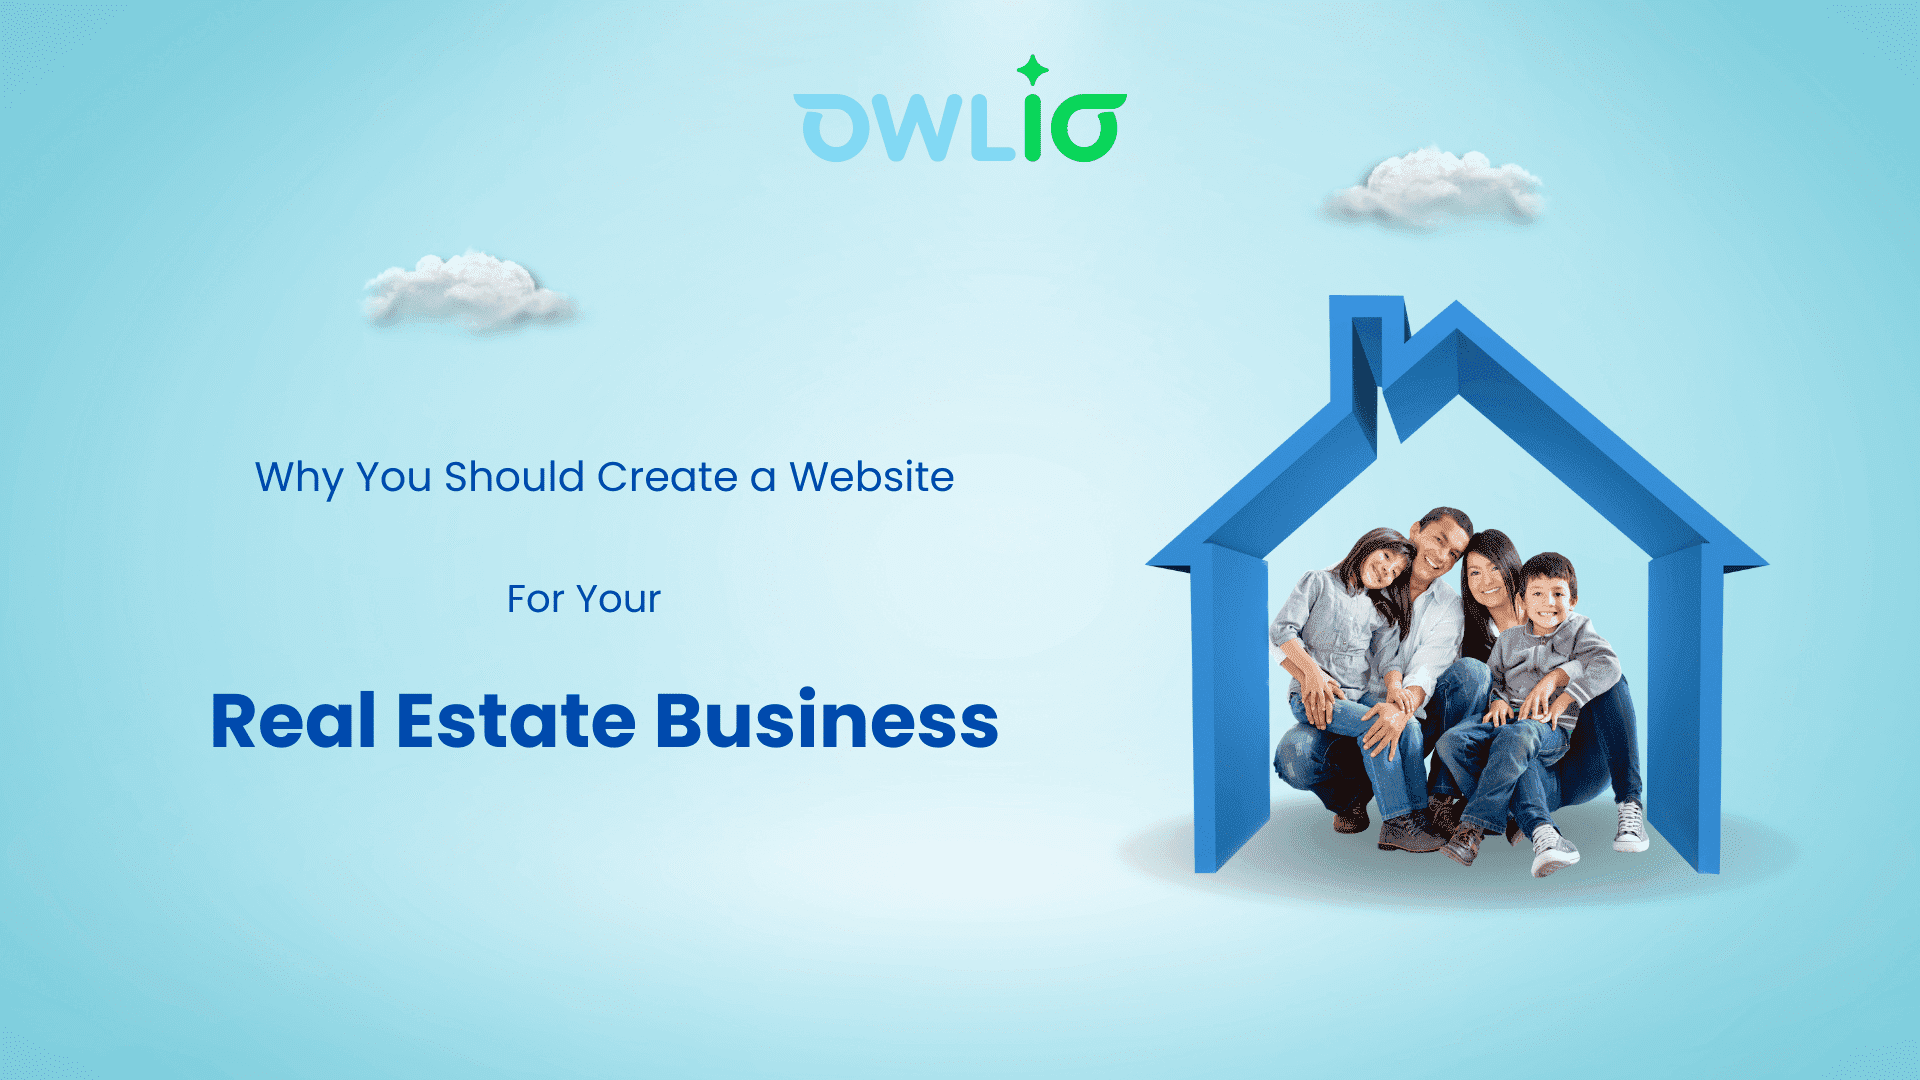 Why You Should Create a Website for Your Real Estate Business